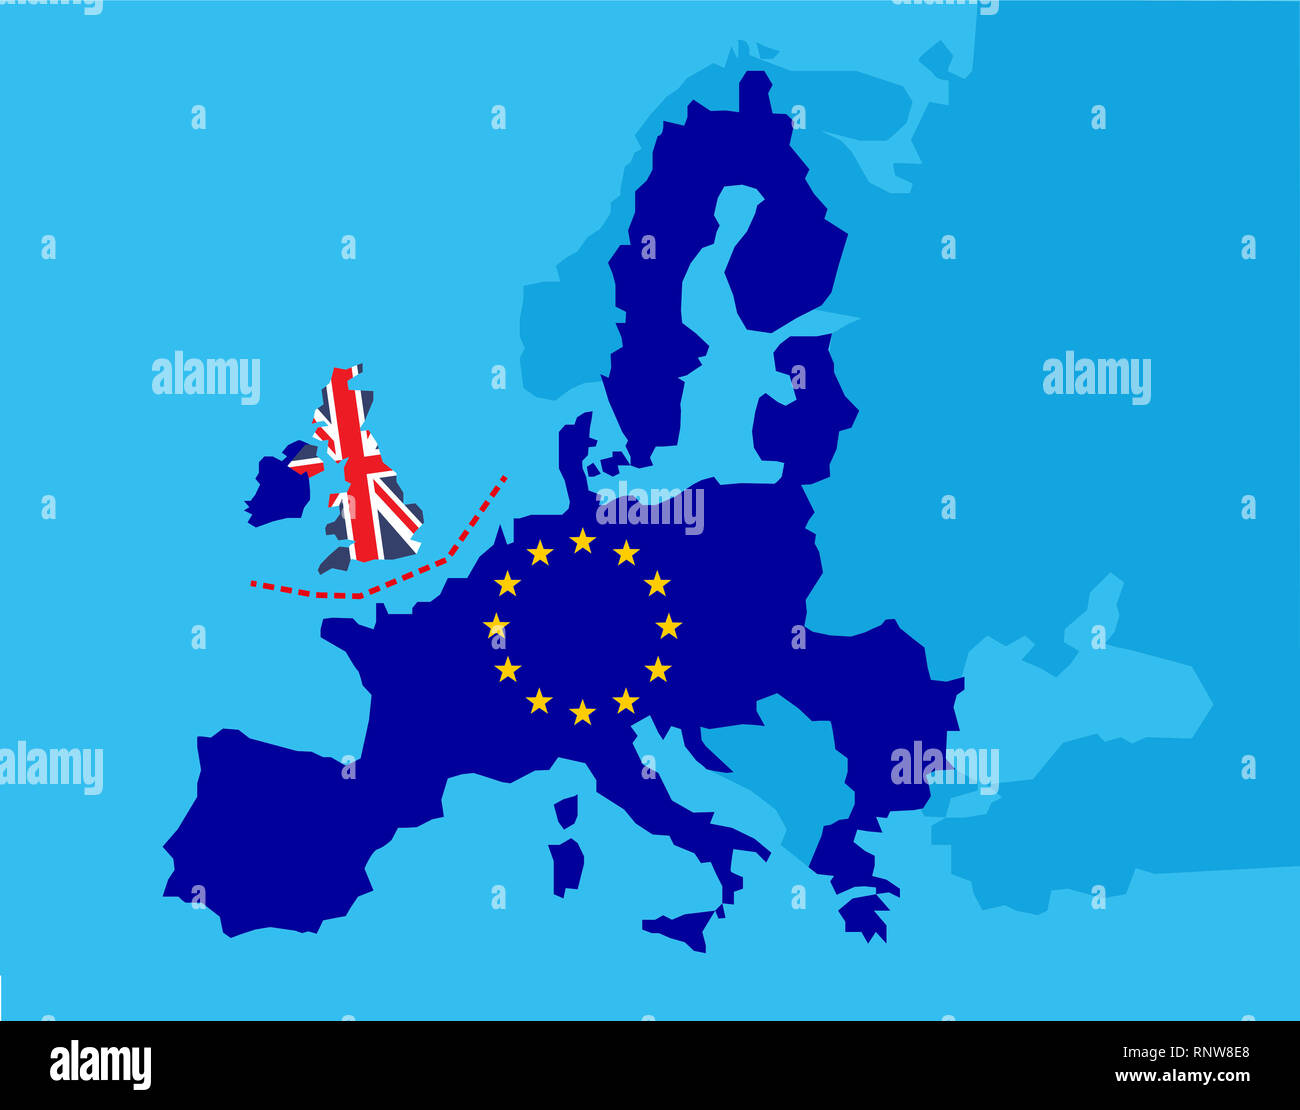 Brexit referendum UK concept - United Kingdom, Great Britain or England leaving EU with UK as a flag and EU stars on map of europe with border line to Stock Photo